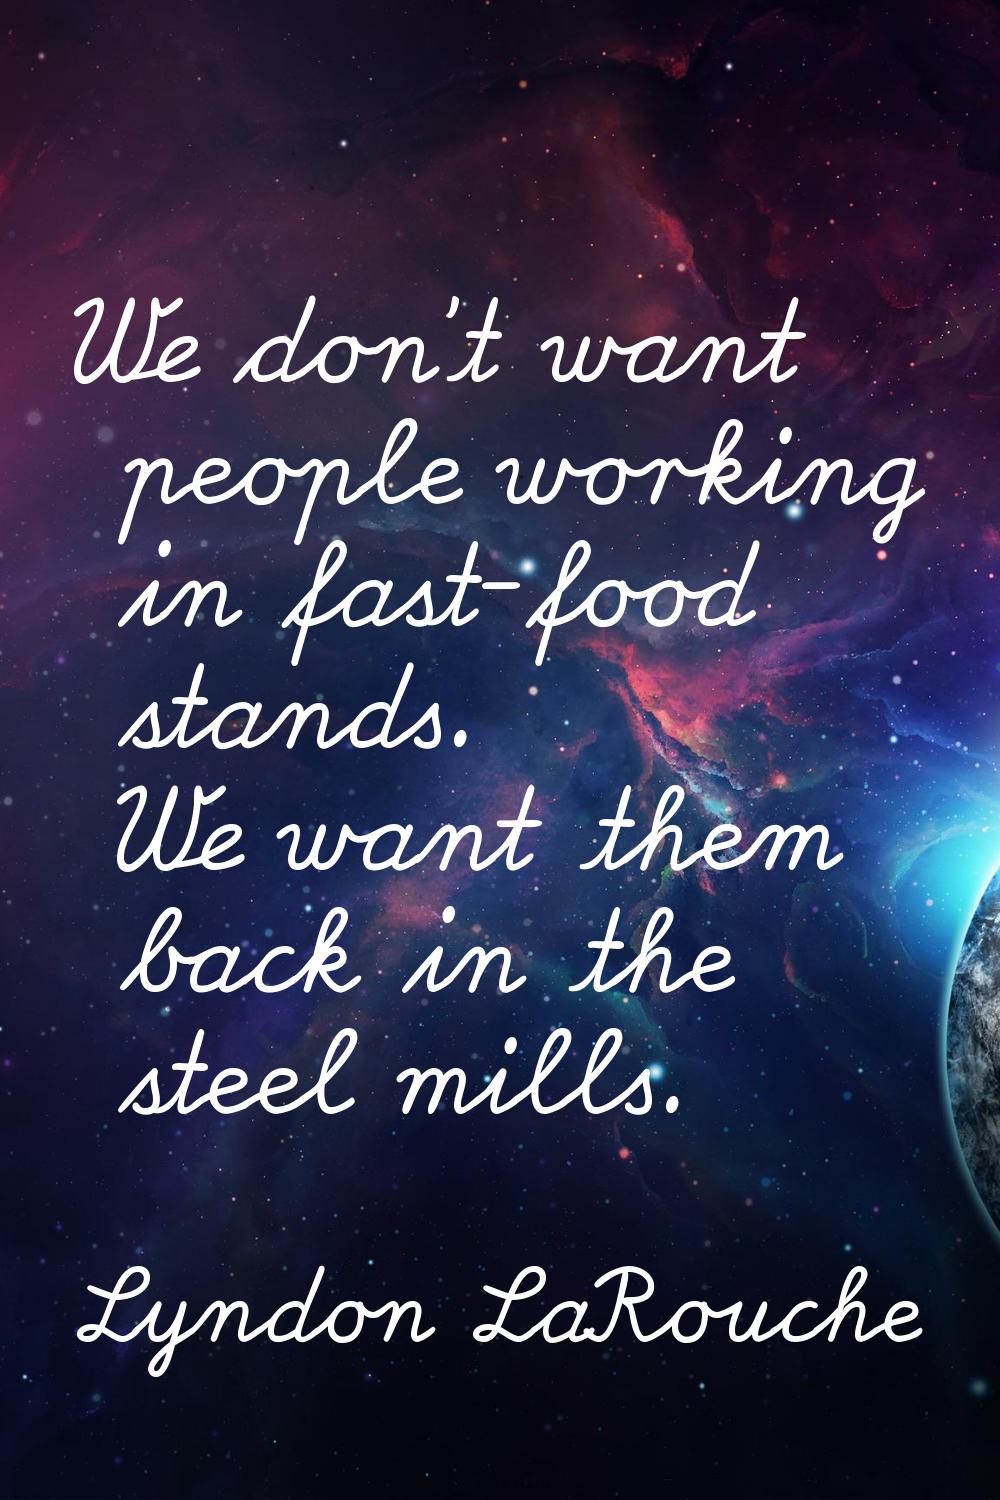 We don't want people working in fast-food stands. We want them back in the steel mills.